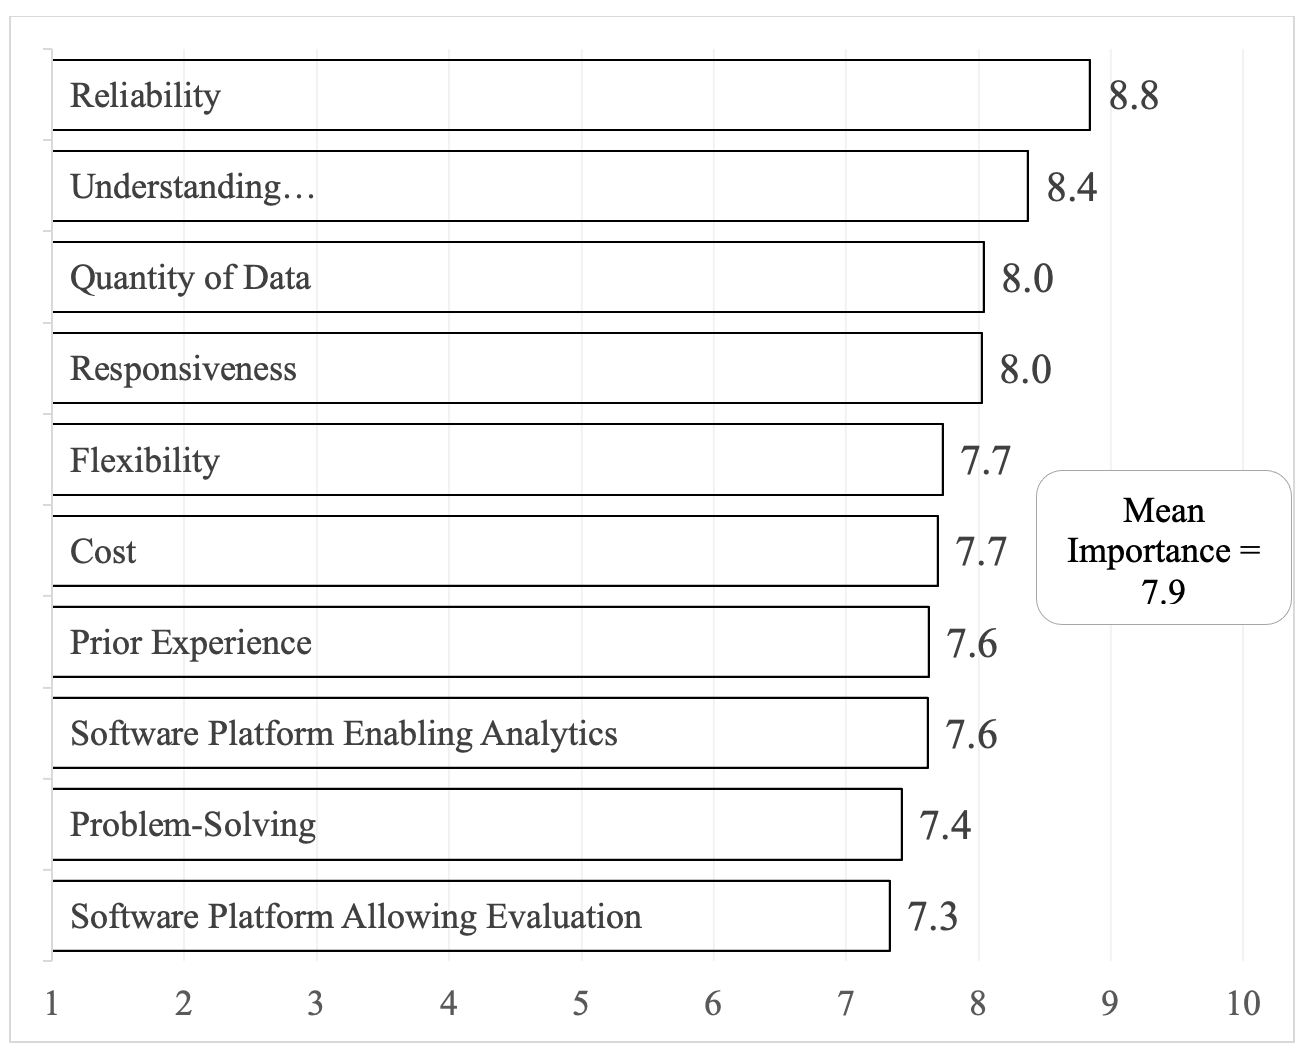 Figure 1. Importance Ratings for Data Intermediaries/Software Attributes